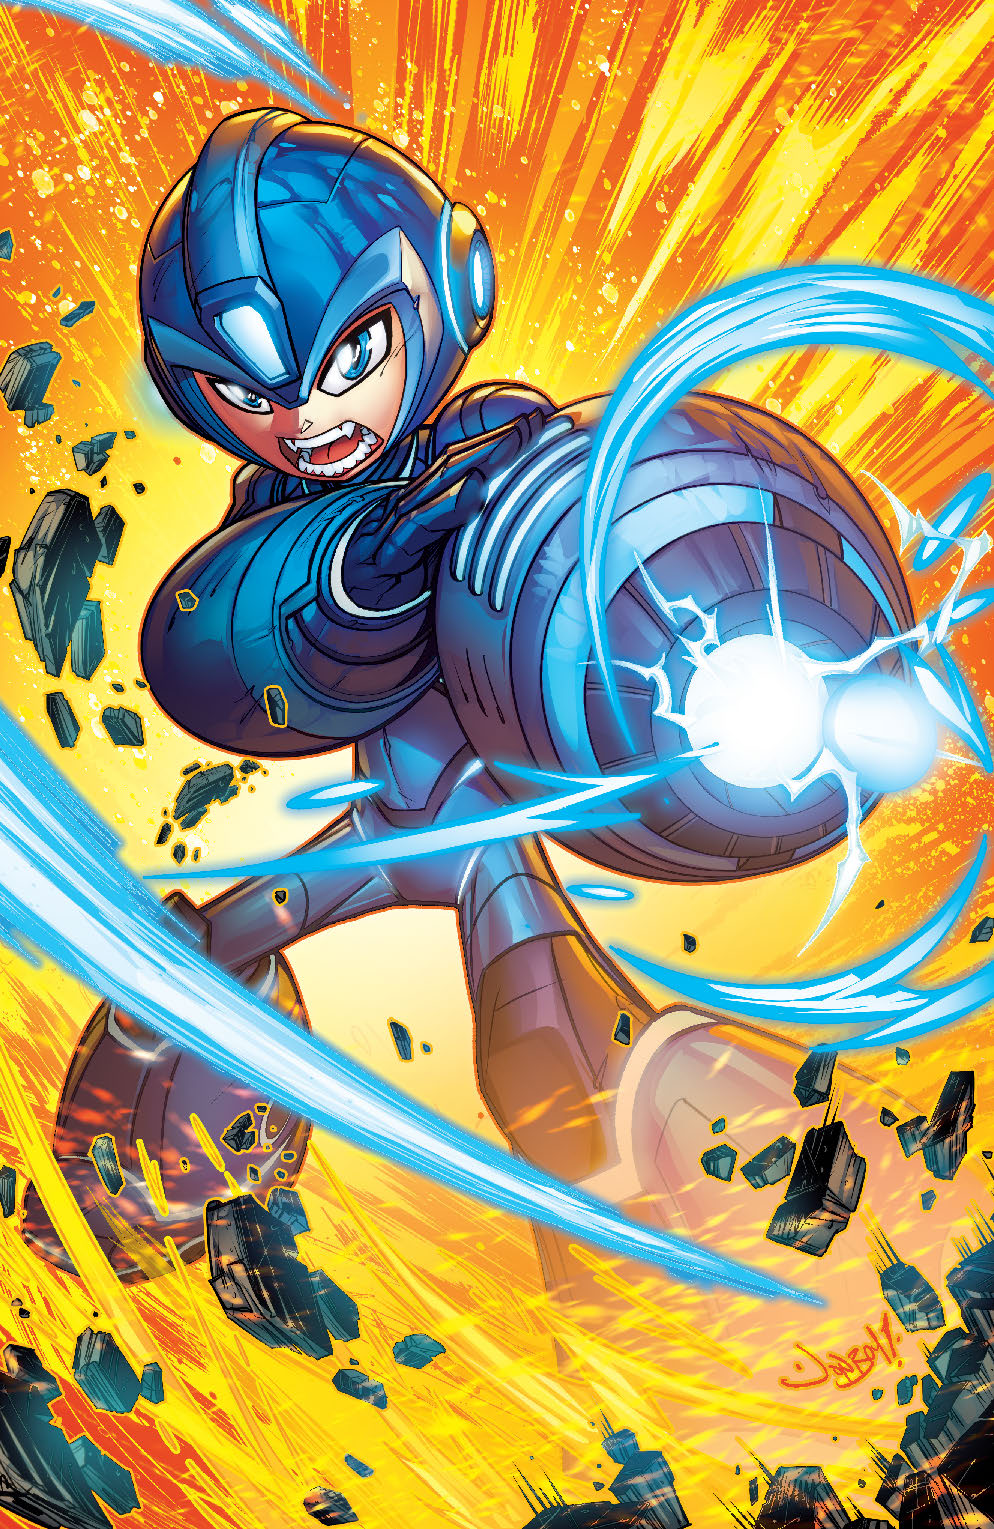 Mega Man Fully Charged #3 Cover C Meyers Variant